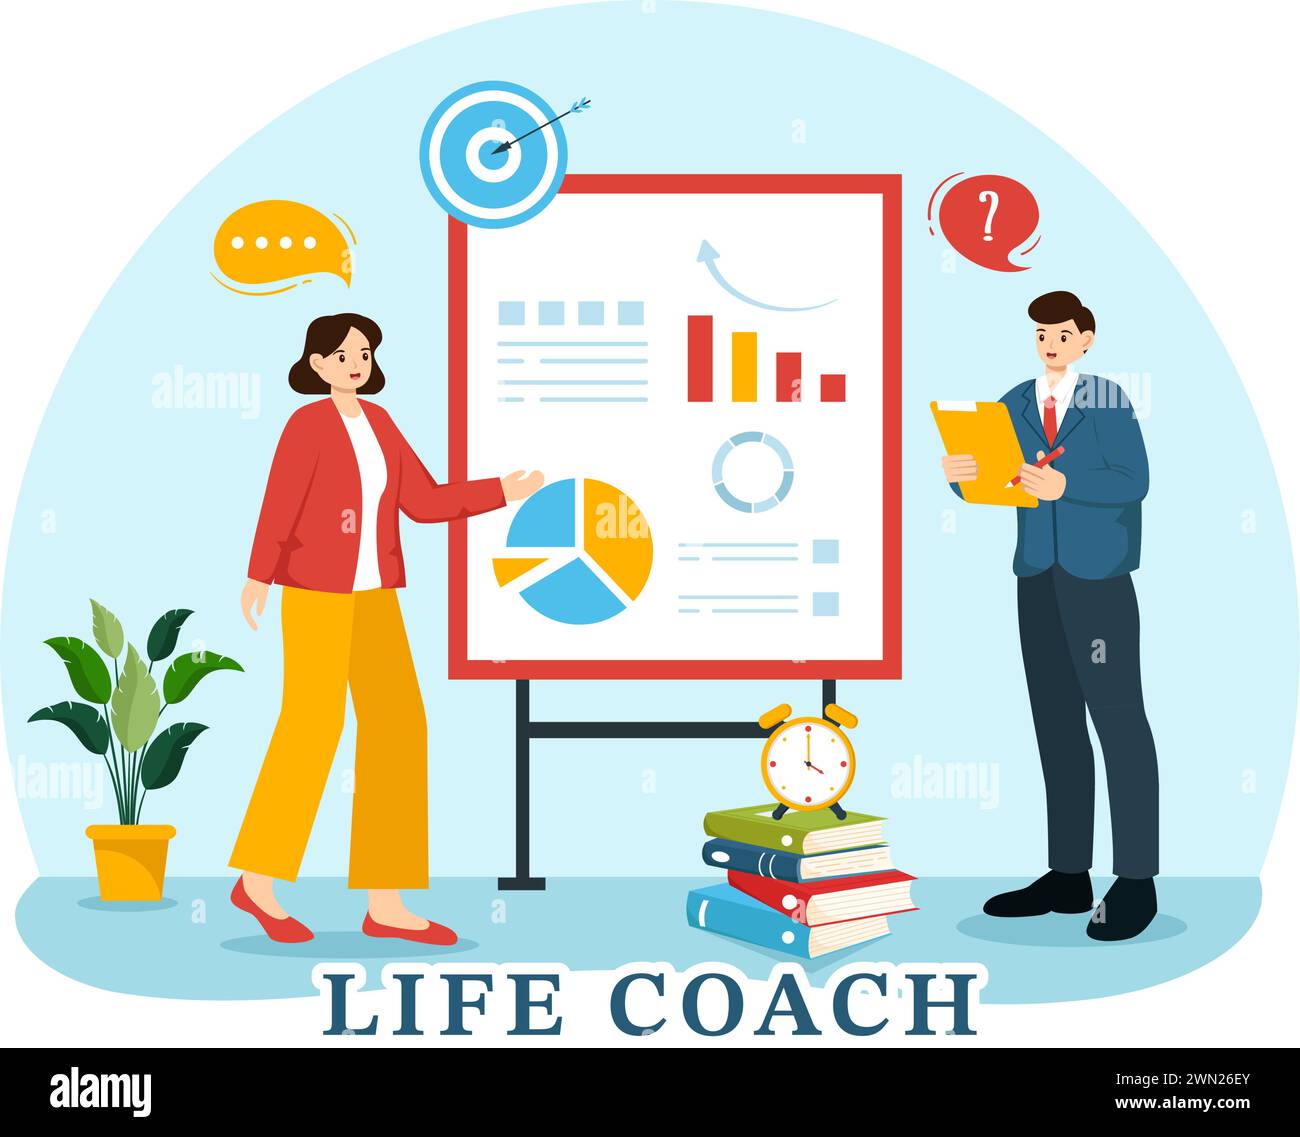 Life Coach Vector Illustration for Consultation, Education, Motivation, Mentoring Perspective and Self Coaching in Business Flat Cartoon Background Stock Vector